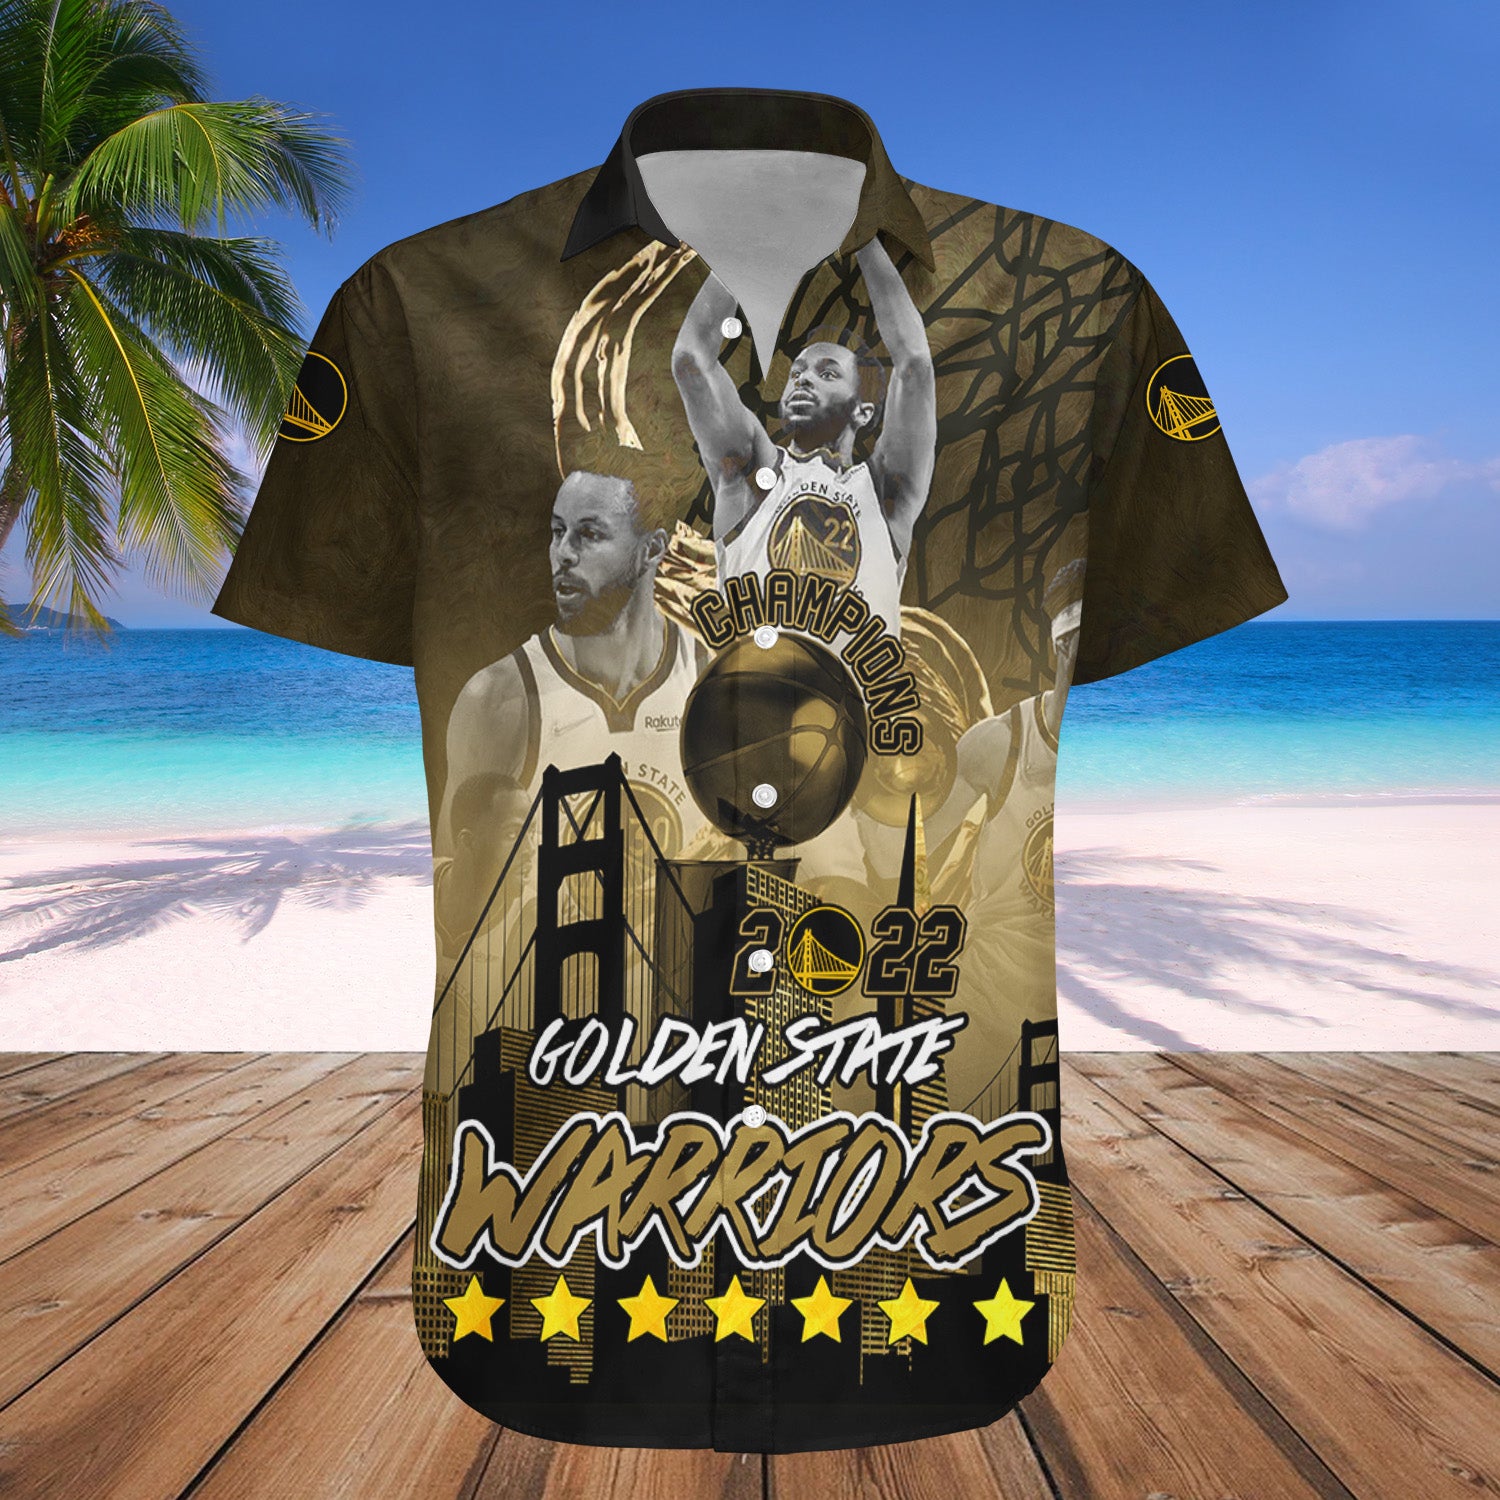 Golden State Warriors Hawaiian Shirt Set Personalized Gold Blooded 2022 Champions - NBA 1